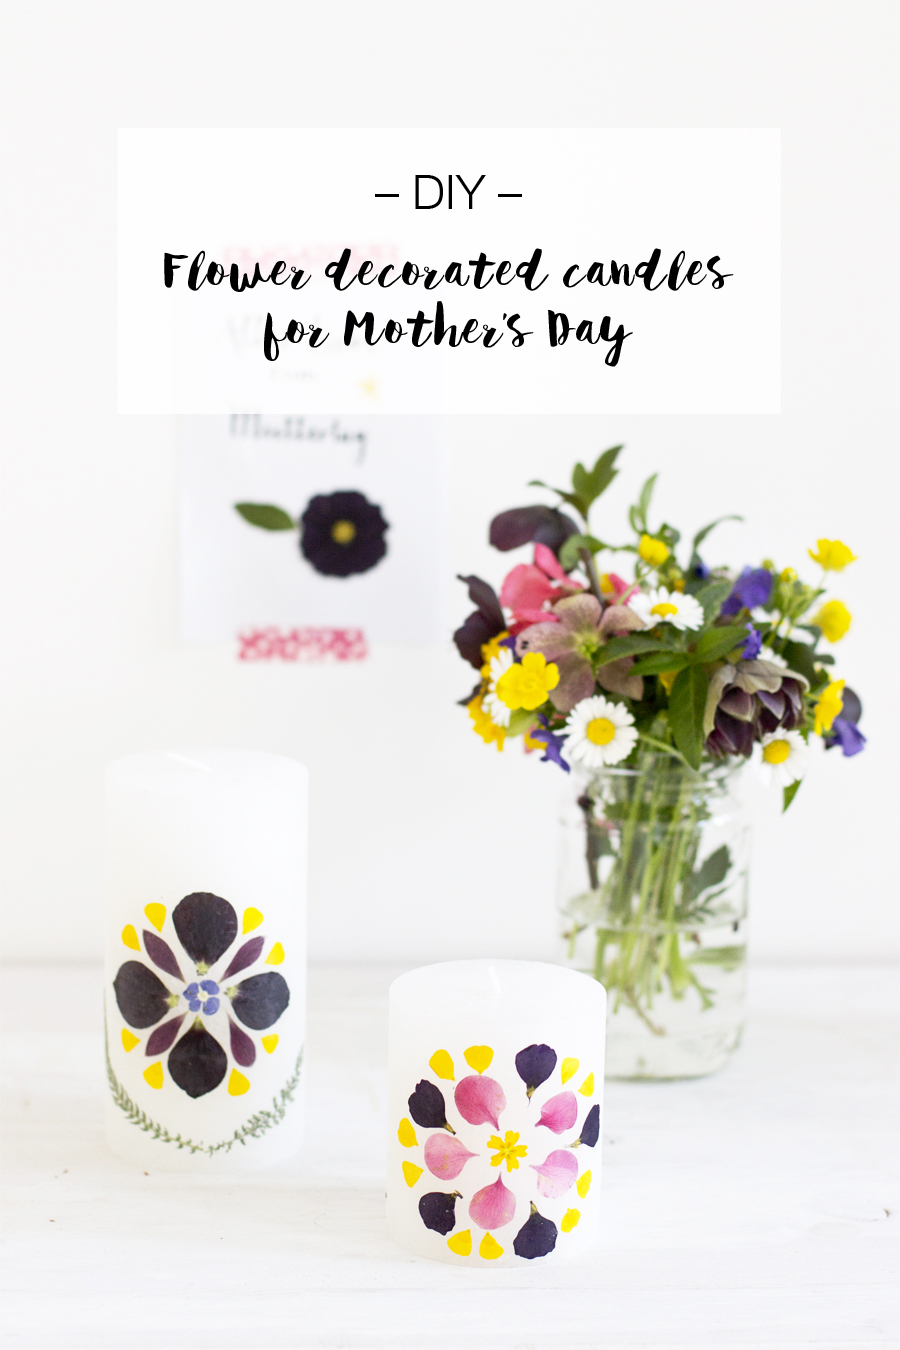 Mother's Day gift idea | LOOK WHAT I MADE ...